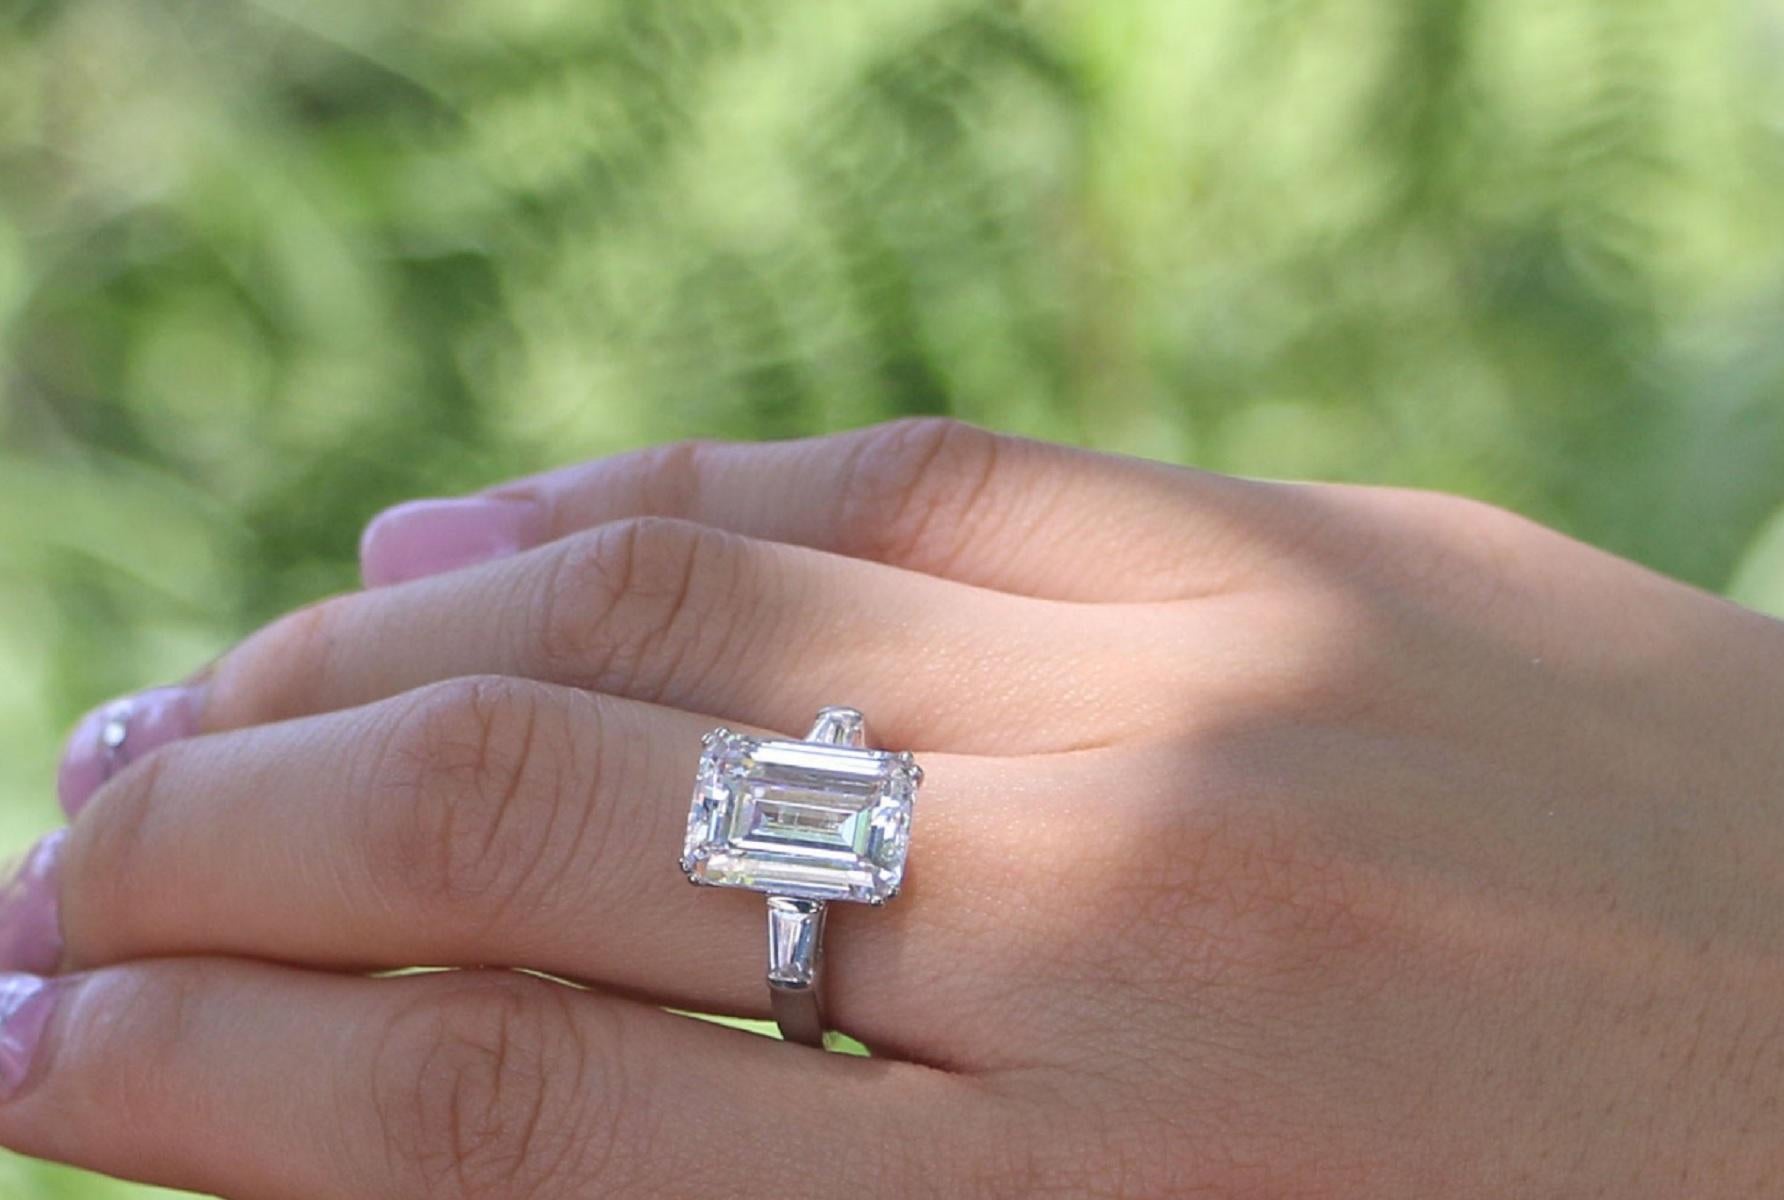 A magnificent GIA certified 3.45 carat emerald cut diamond so beautiful is impossible not to fall in love.

The stone is white very clear and has excellent proportions having an excellent cut so it actually looks bigger than the carat